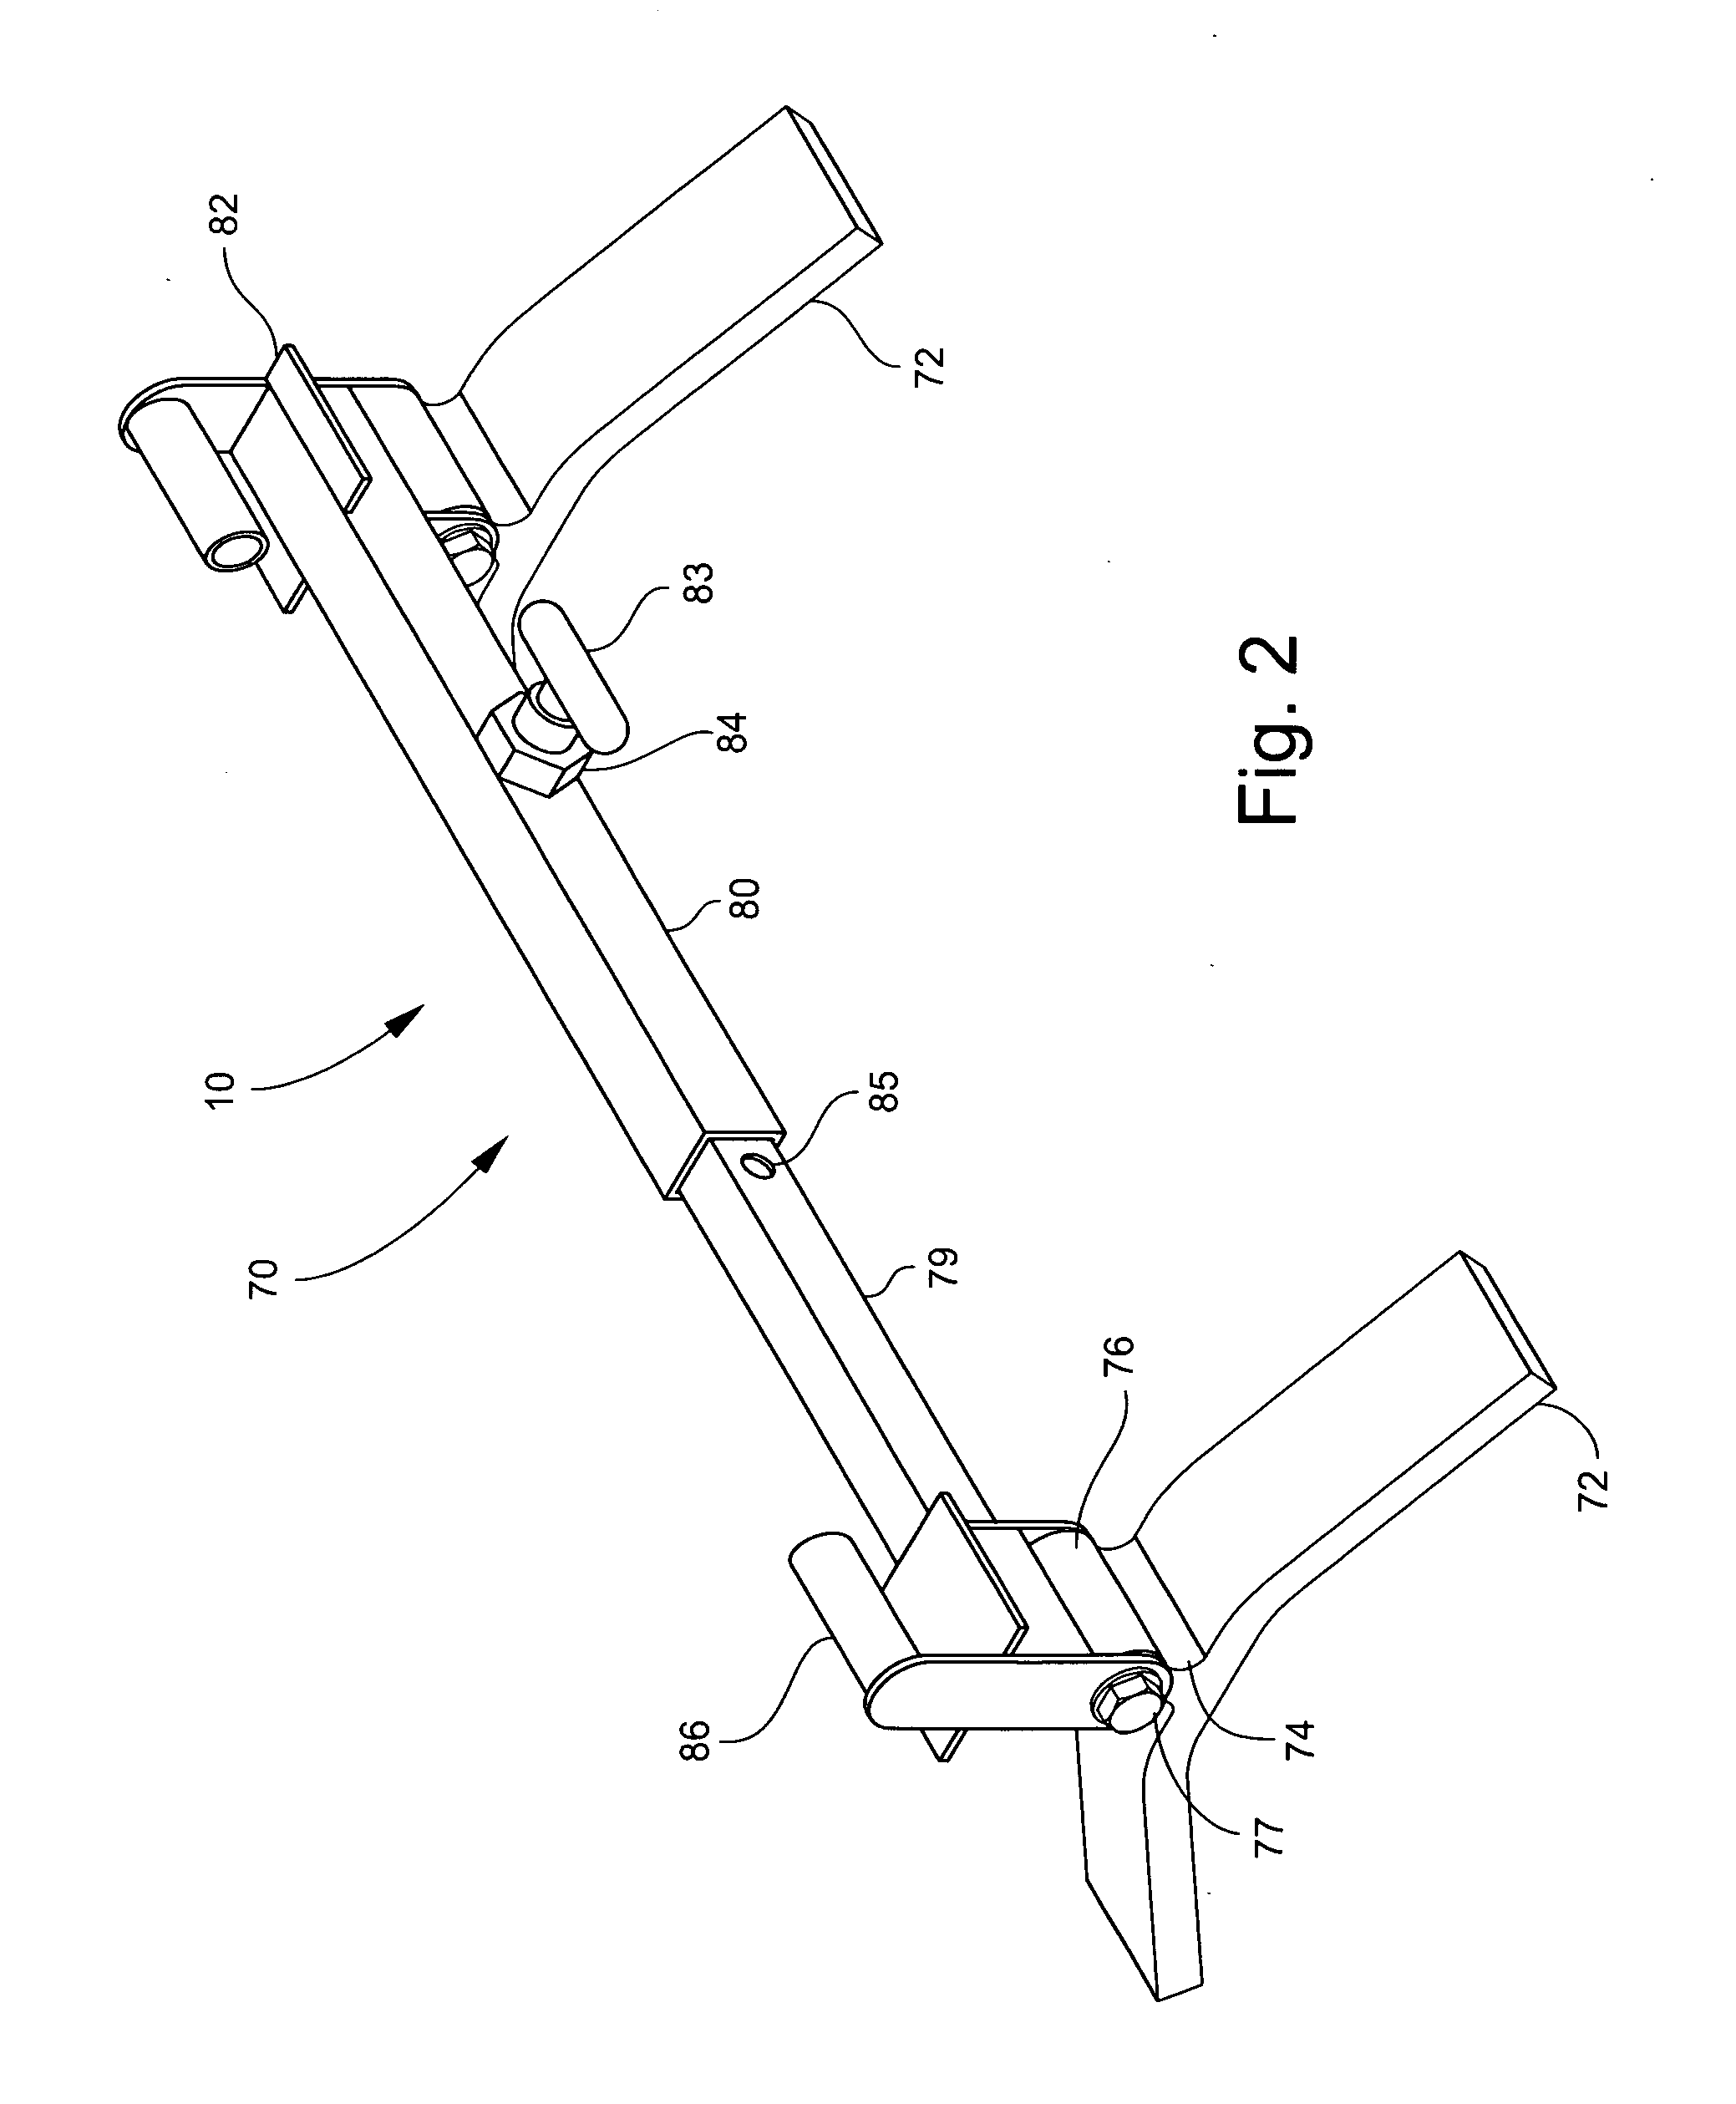 Device and method for transporting elongate objects using a pick-up truck